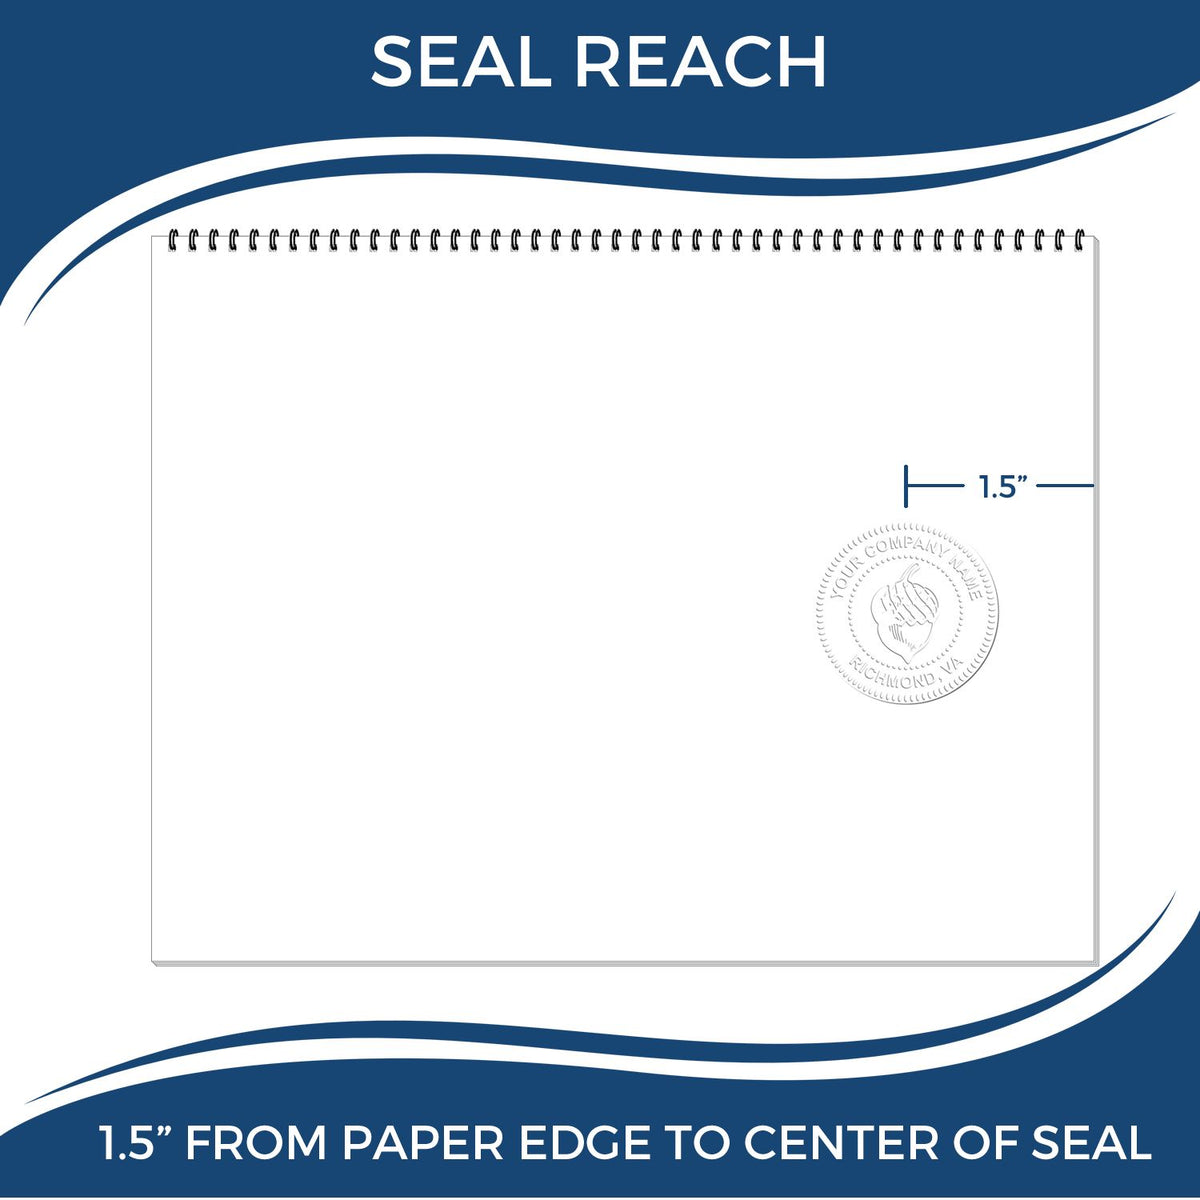 An infographic showing the seal reach which is represented by a ruler and a miniature seal image of the Soft Pocket Tennessee Landscape Architect Embosser